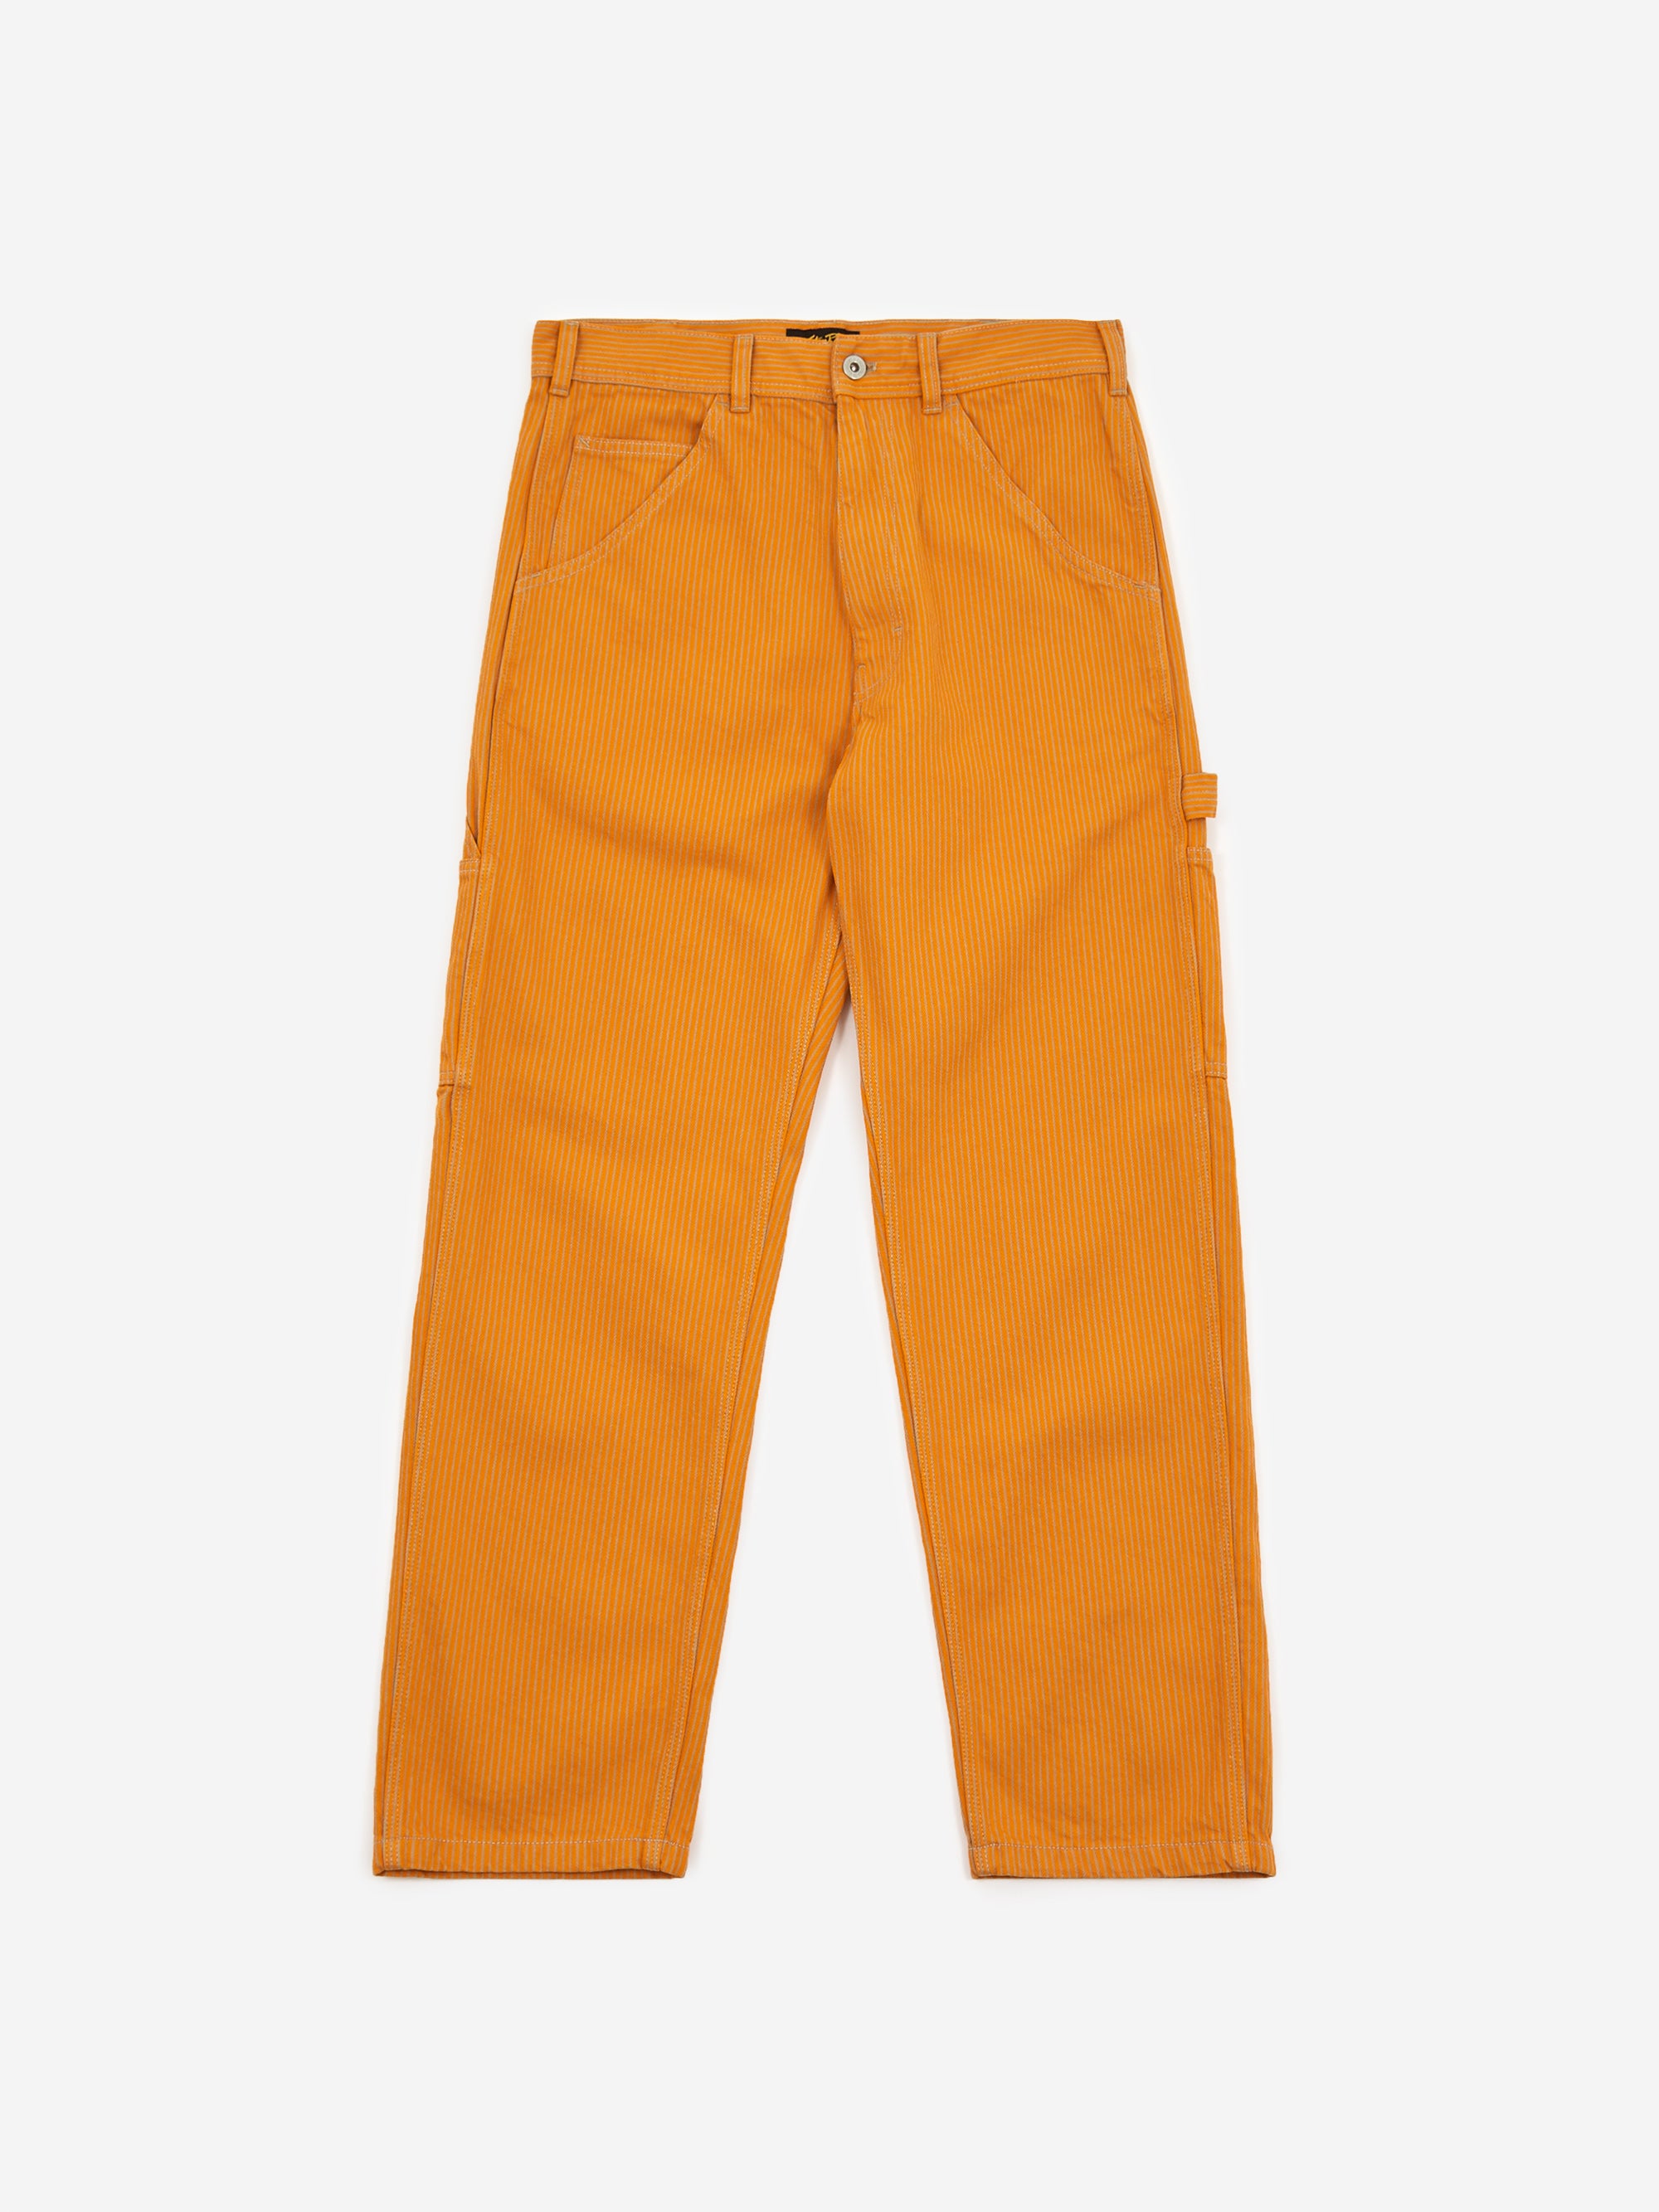 Spicy Orange - Stan Ray Painter Pants – THE CONSISTENCY PROJECT